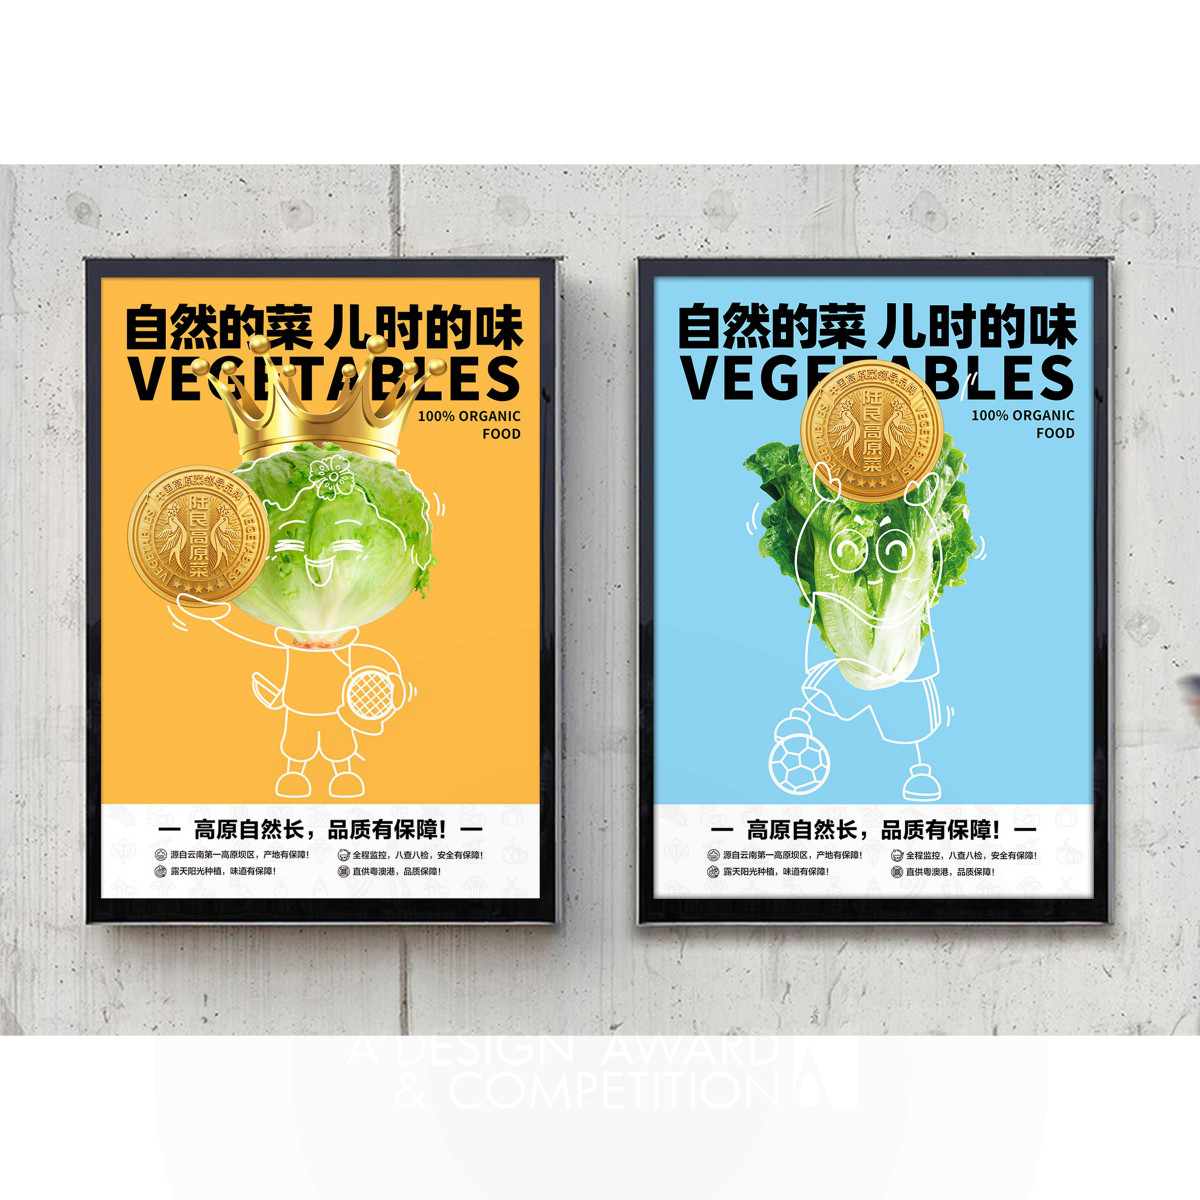 Luliang Highland Vegetables Brand Identity by Tian Rui Ling Dong Iron Graphics, Illustration and Visual Communication Design Award Winner 2024 